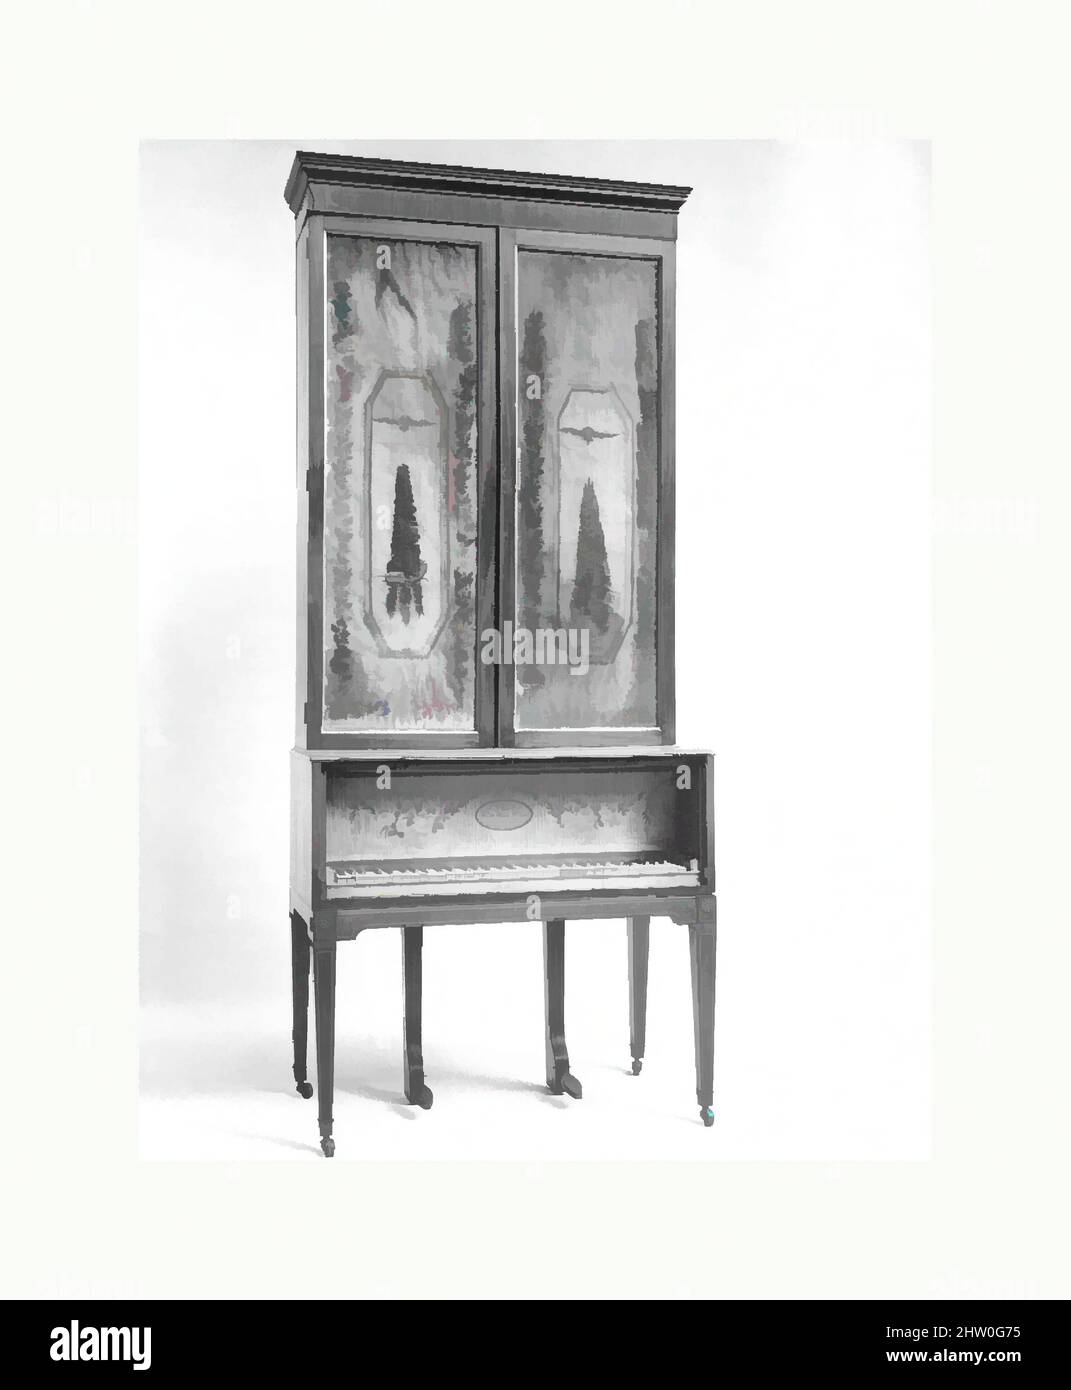 Art inspired by Upright (Cabinet) Piano, 1801, England, British, Wood, various, Overall: 257.5 x 110.8 x 56.5cm (101 3/8 x 43 5/8 x 22 1/4in.), Chordophone-Zither-struck-piano, M. & W. Stodart, Classic works modernized by Artotop with a splash of modernity. Shapes, color and value, eye-catching visual impact on art. Emotions through freedom of artworks in a contemporary way. A timeless message pursuing a wildly creative new direction. Artists turning to the digital medium and creating the Artotop NFT Stock Photo